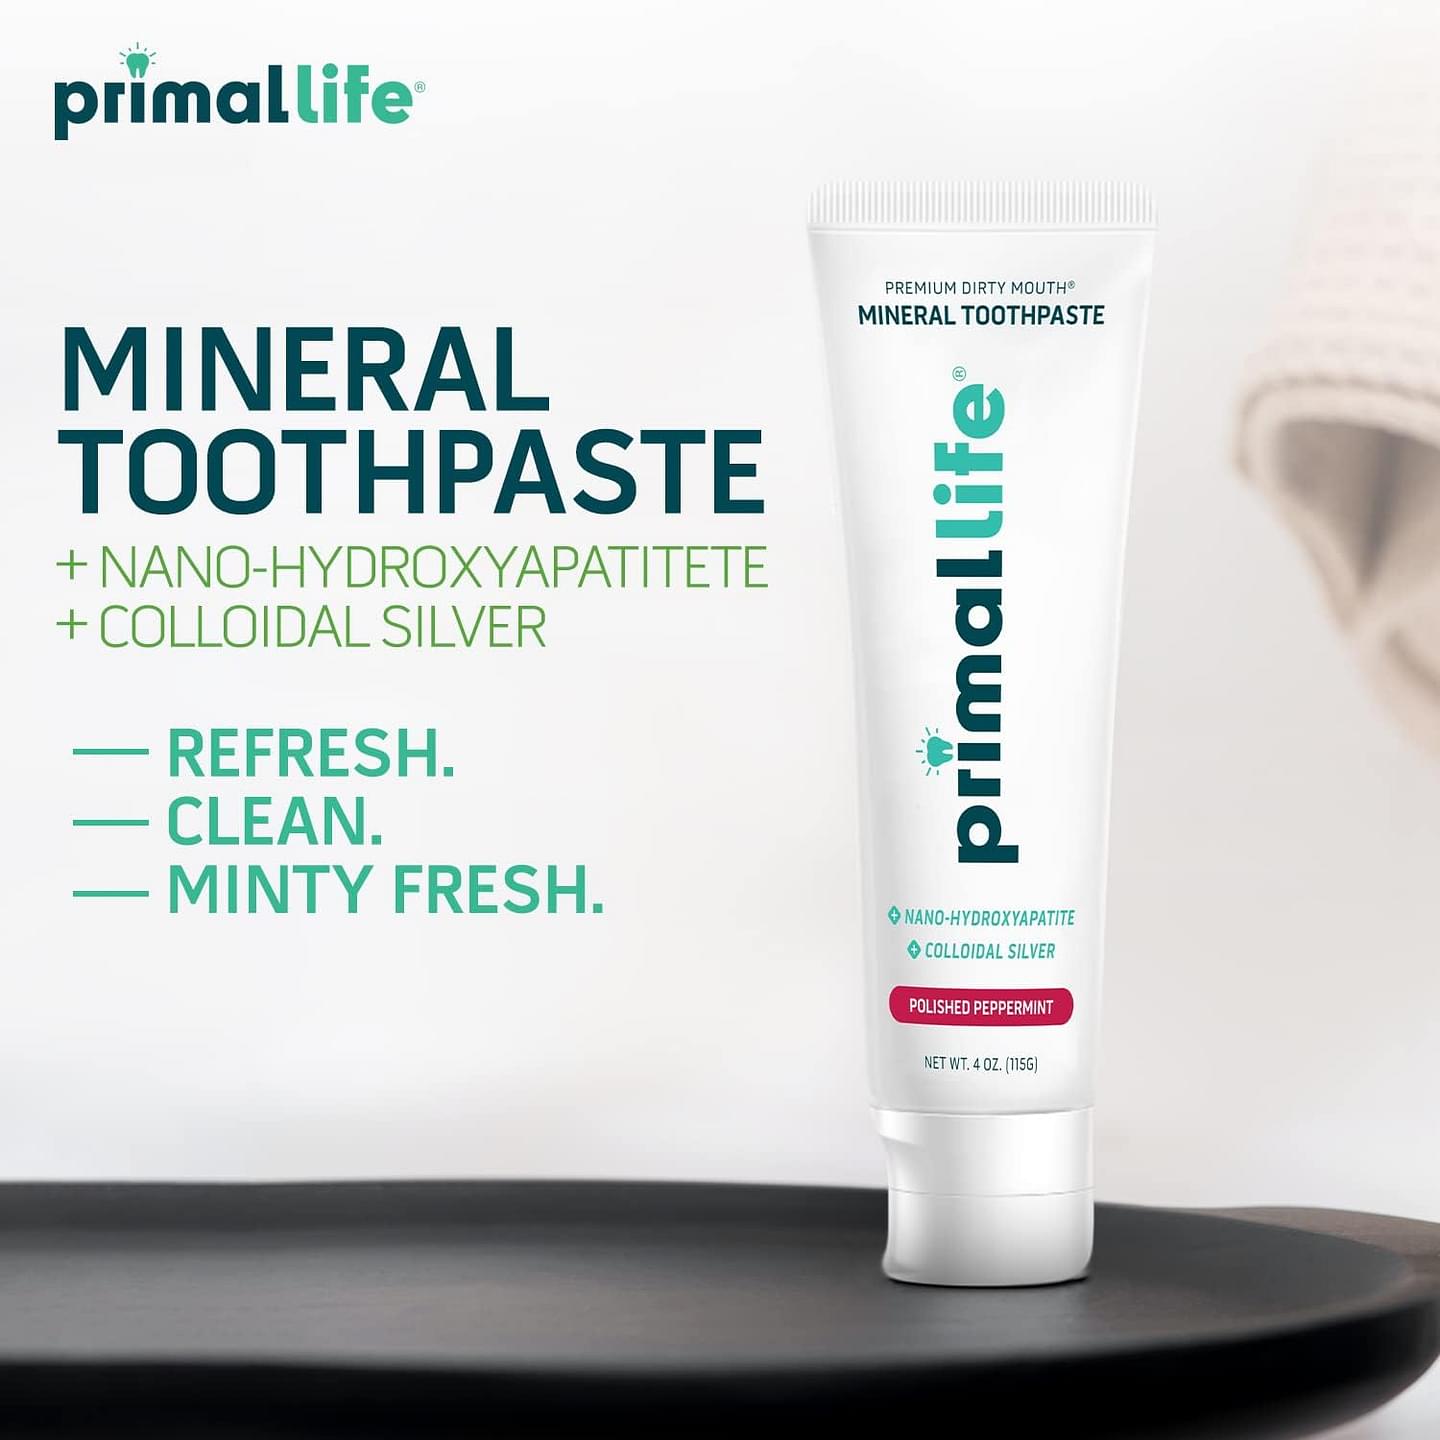 Primal Life Organics - Dirty Mouth Natural Alkalizing Toothpaste, Hydroxyapatite, Flavored Essential Oils, Natural Kaolin, Bentonite Clay, Colloidal Silver, Organic, Vegan (Peppermint Flavor, 4oz) Peppermint 4 Ounce (Pack of 1)